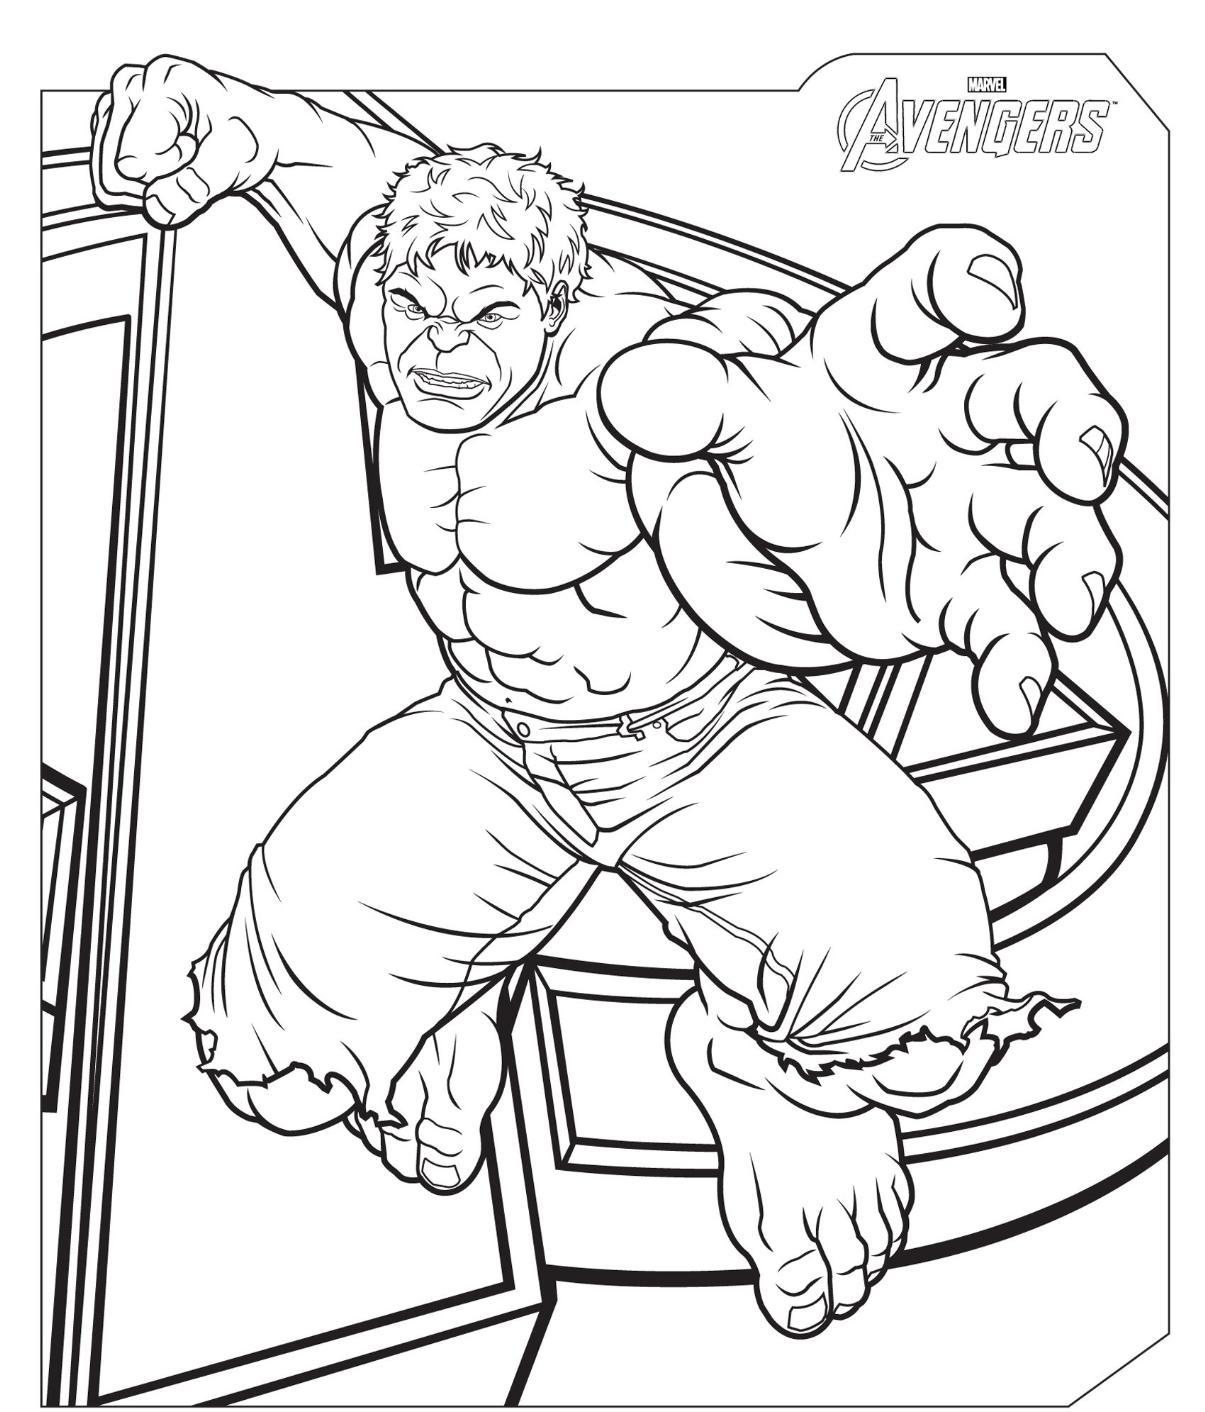 kids coloring pages free printable avengers Avengers coloring pages